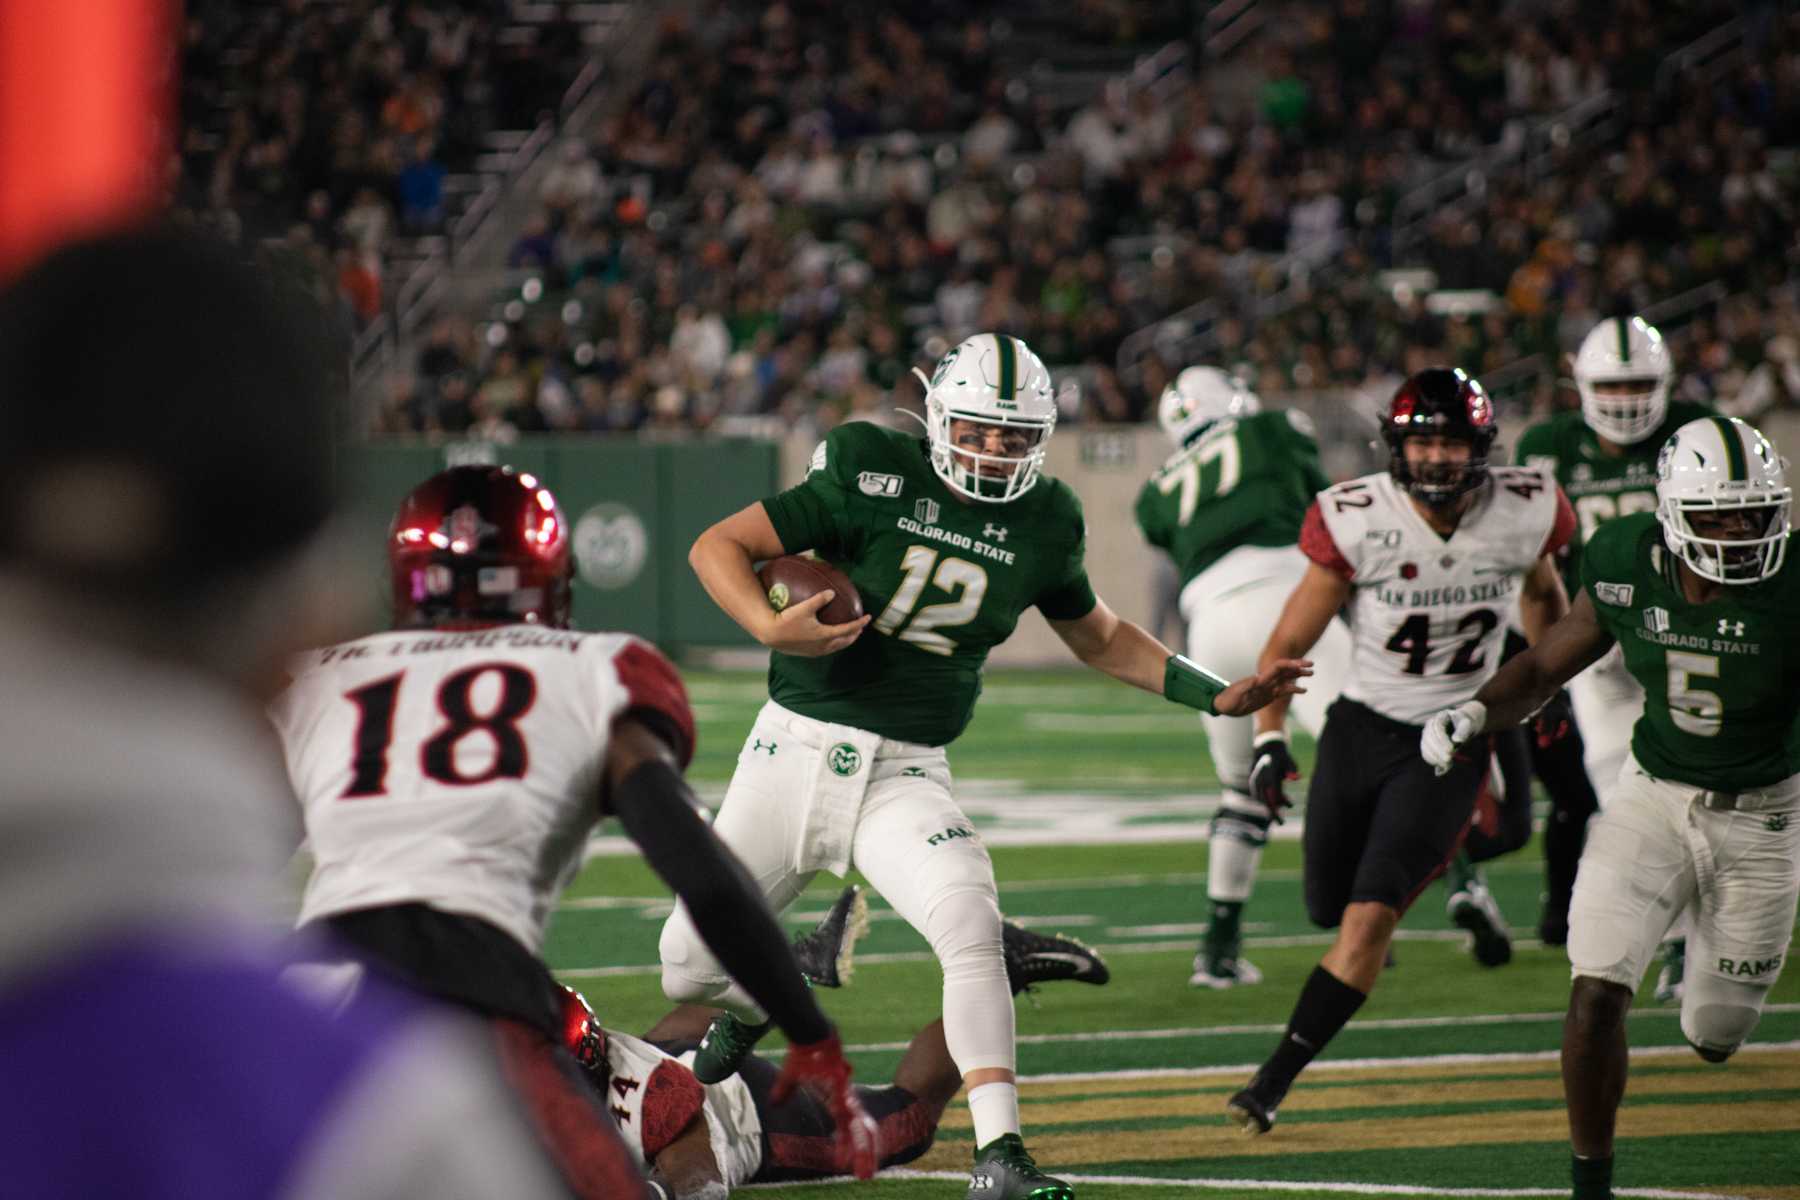 Patrick O'Brien evades a tackle while running the ball, during the Colorado State homecoming game against San Diego State. CSU falls short 24-10.